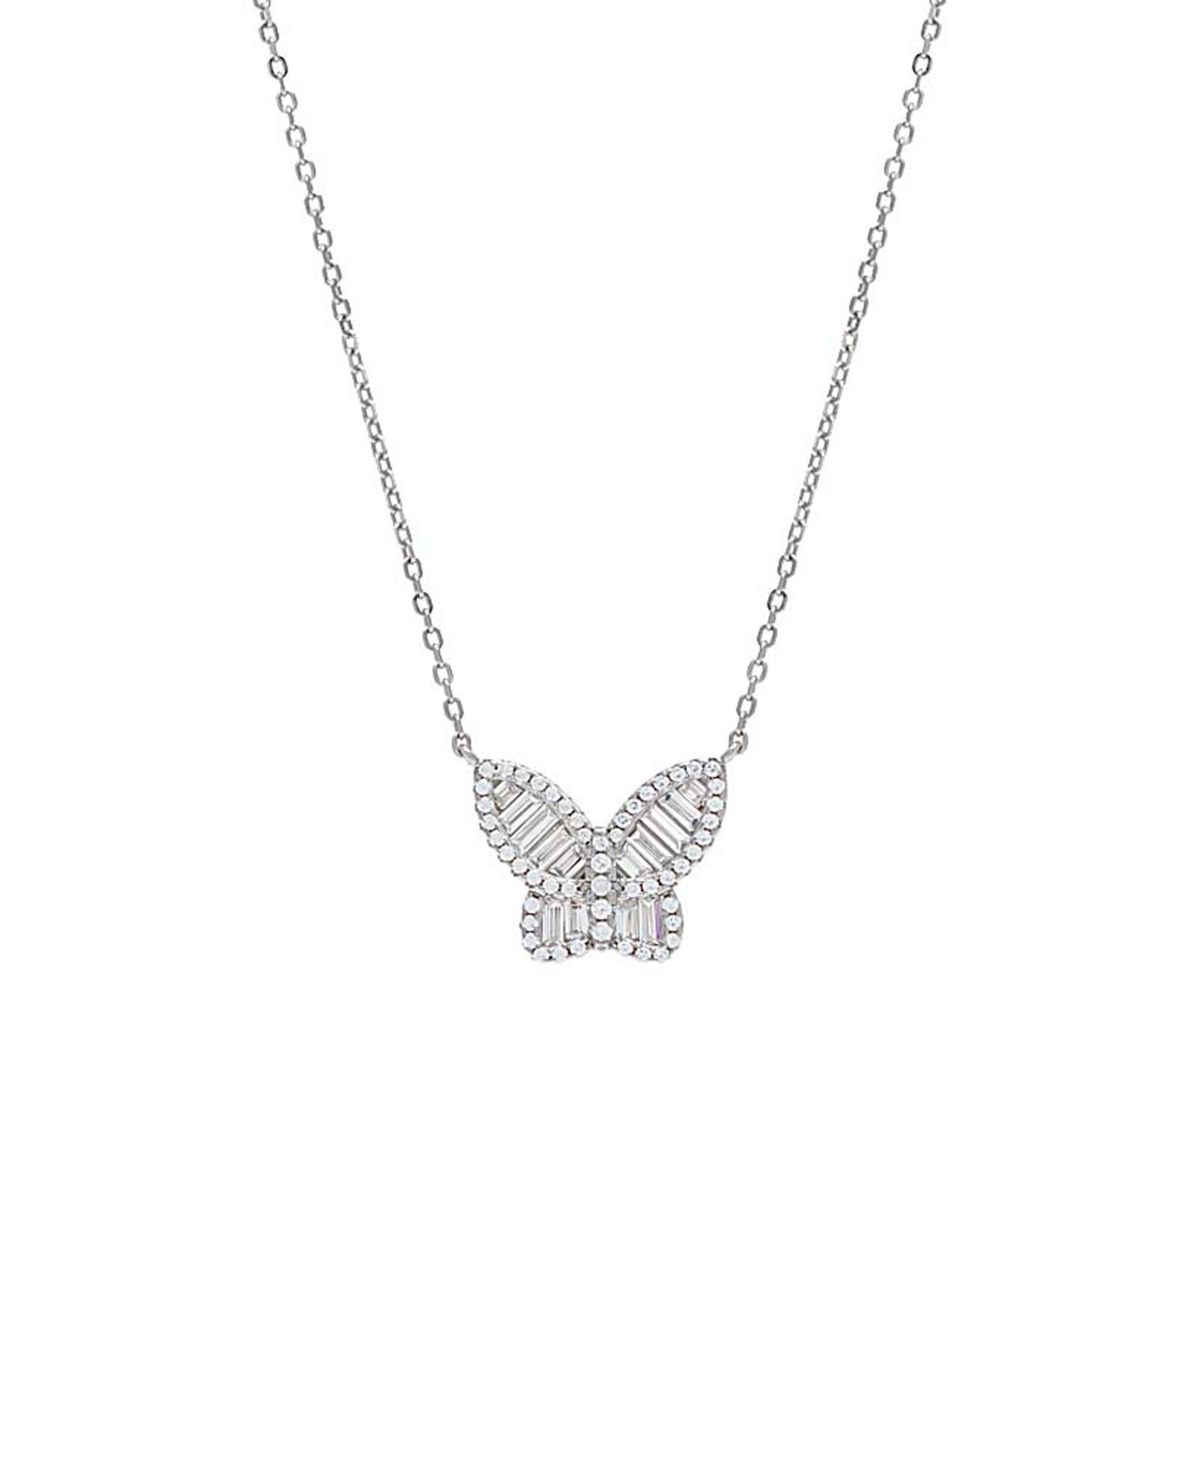 by Adina Eden Large Baguette Butterfly Necklace Pave Sterling Silver